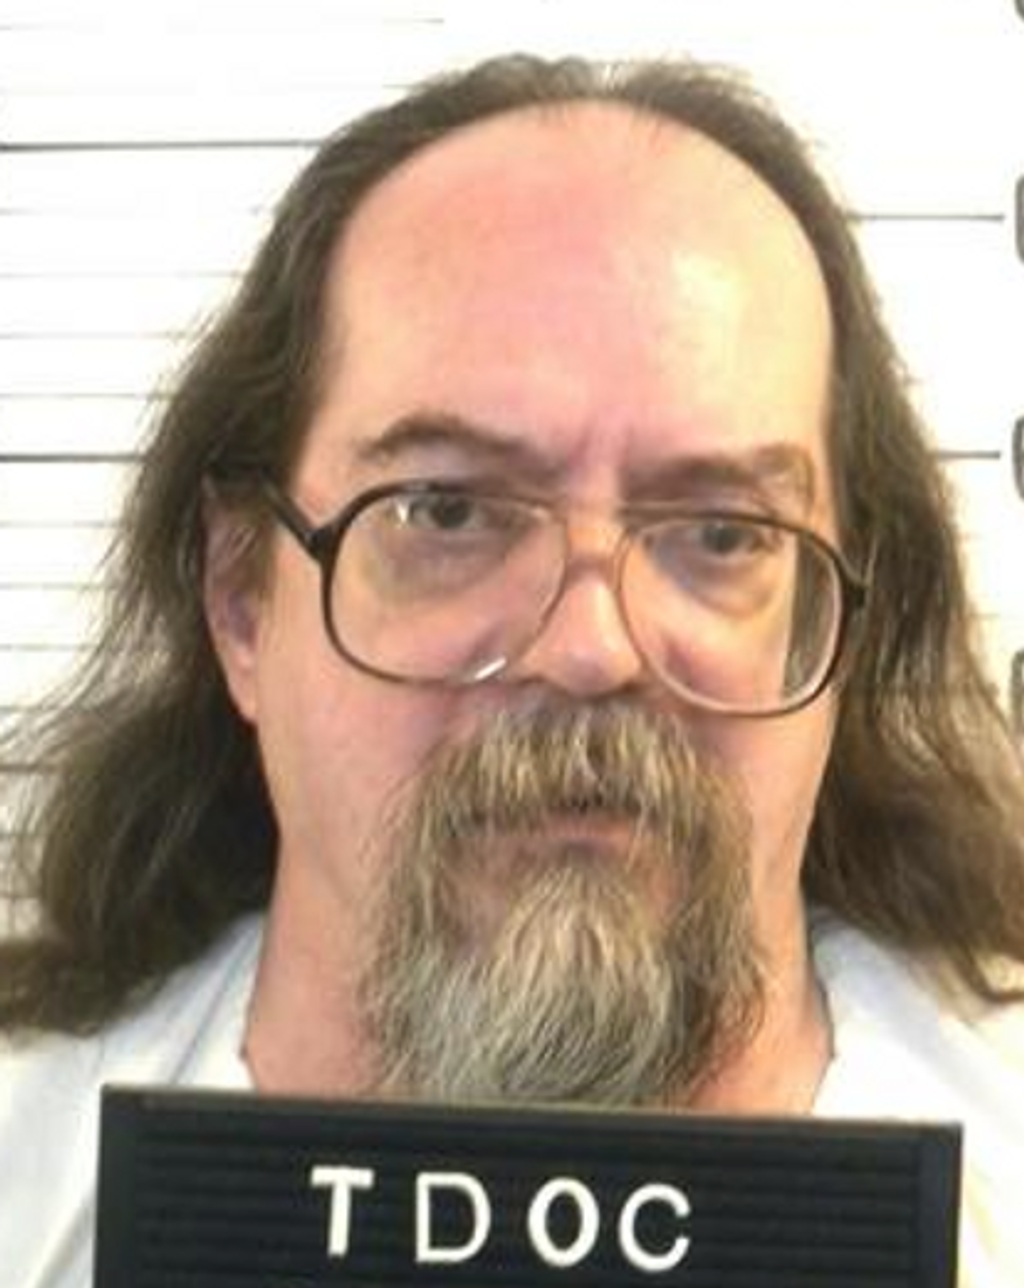 Tennessee Executes Billy Ray Irick in First Execution Since 2009